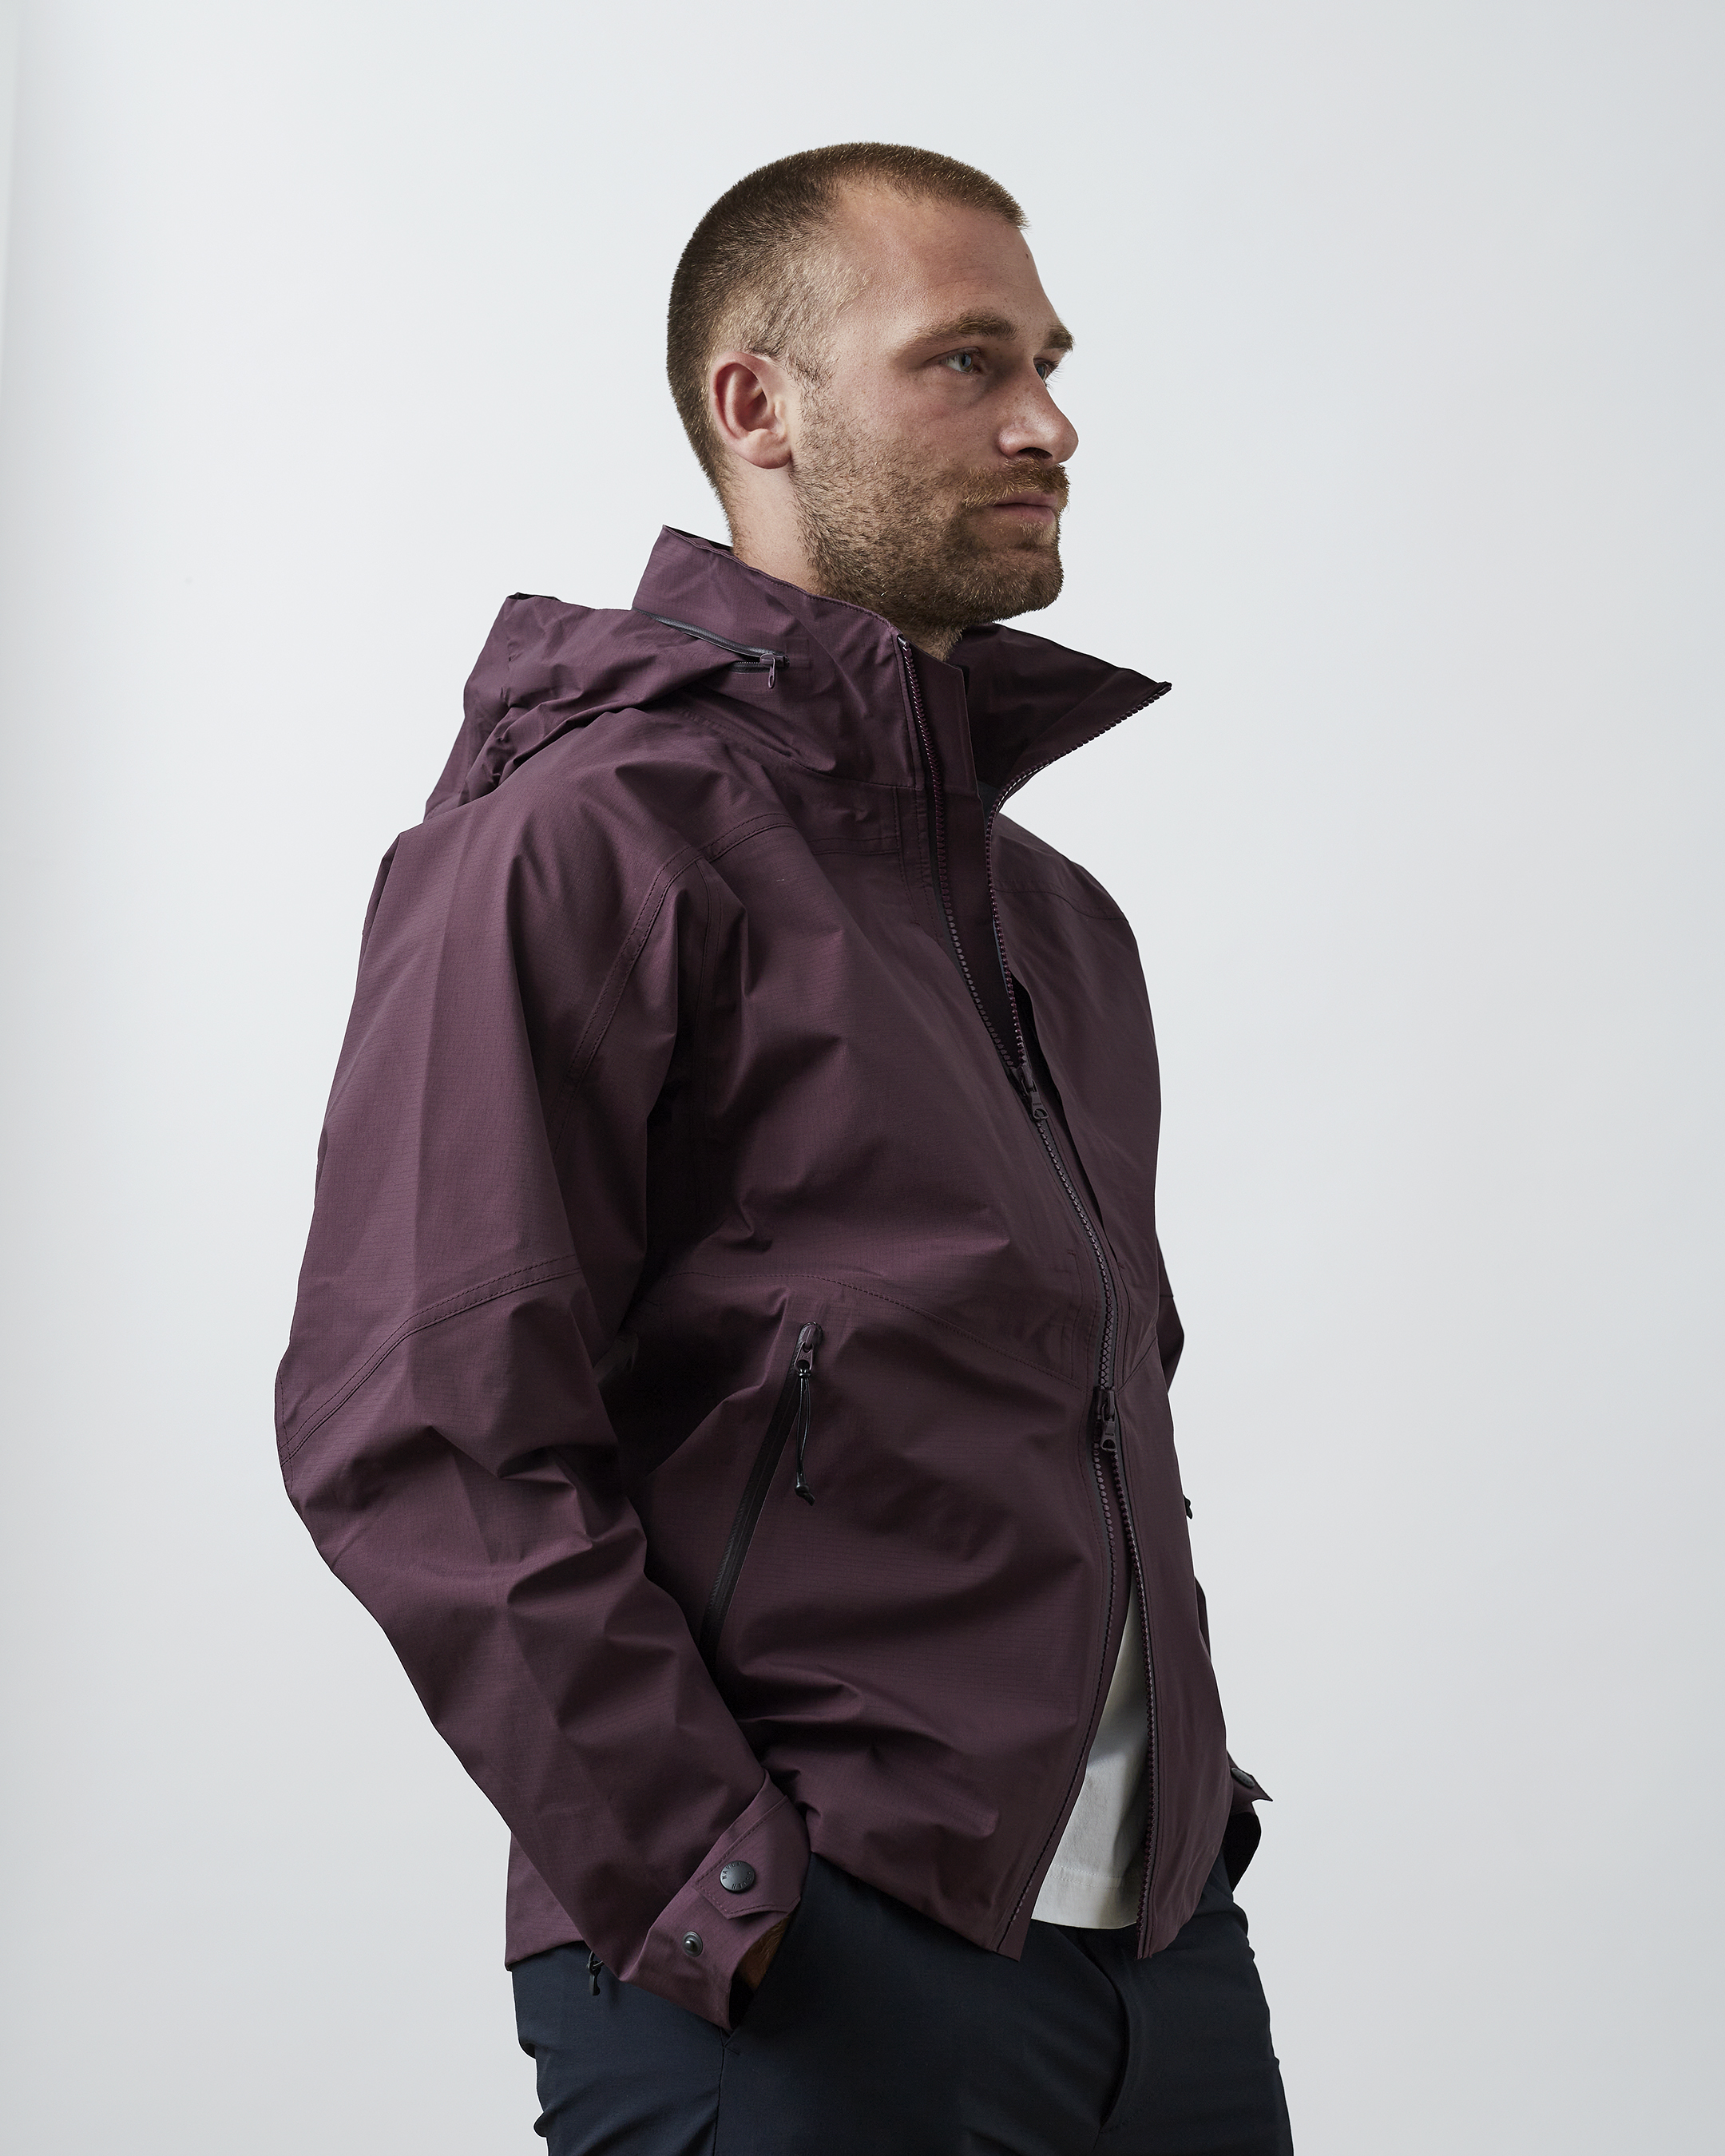 Norse Store | Shipping Worldwide - Haven Condor Jacket - Bruise